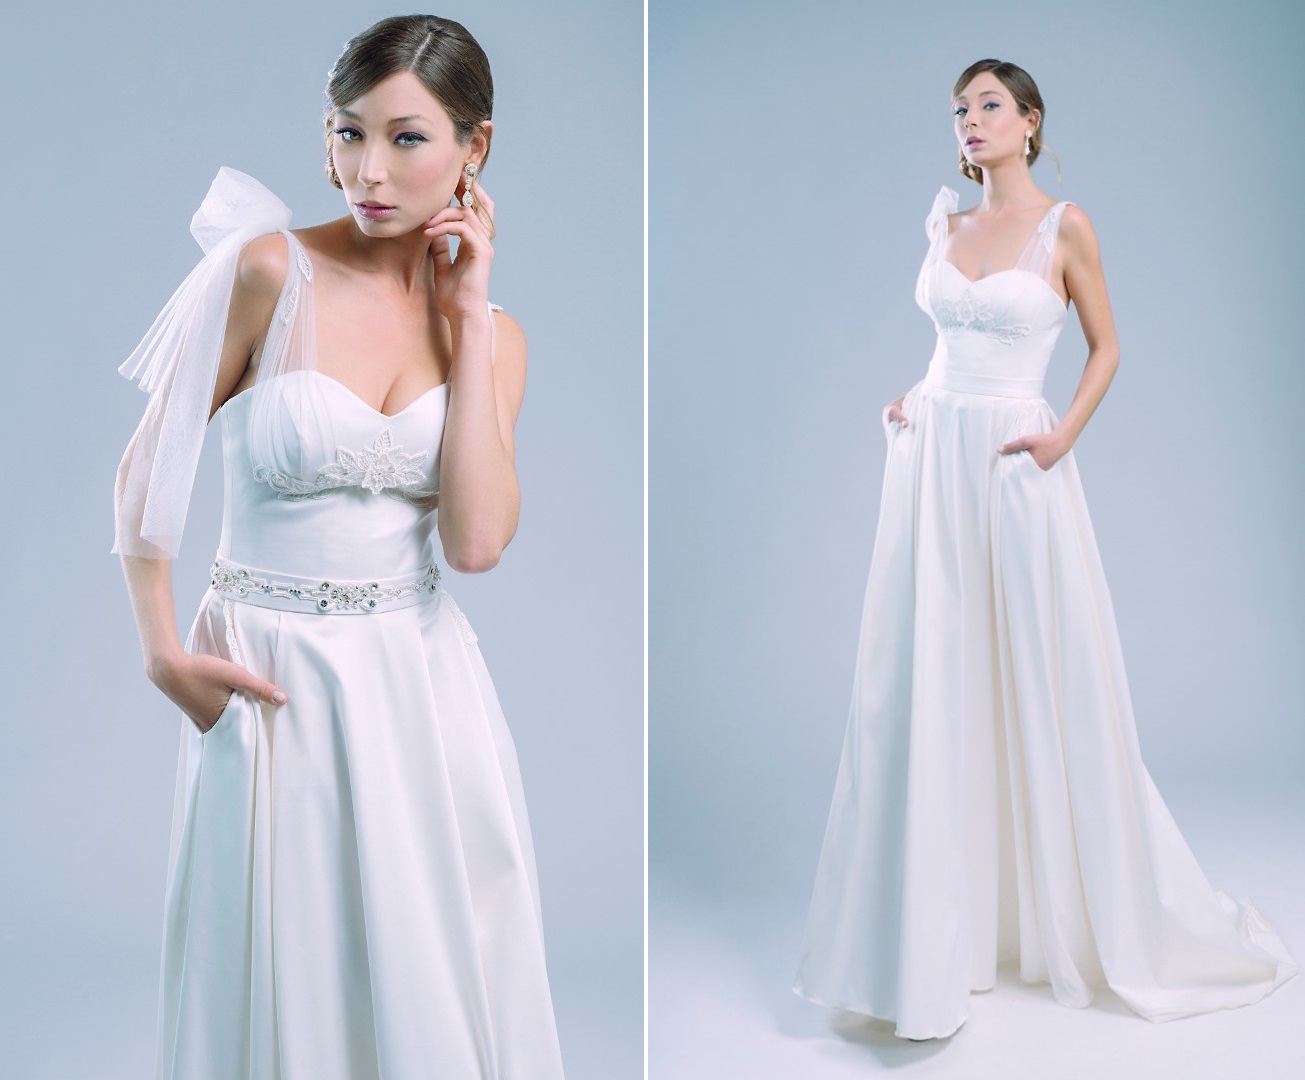 The Beautiful 2016 Bridal Collection from Petite Lumiere - Amabile Bridal Ensemble